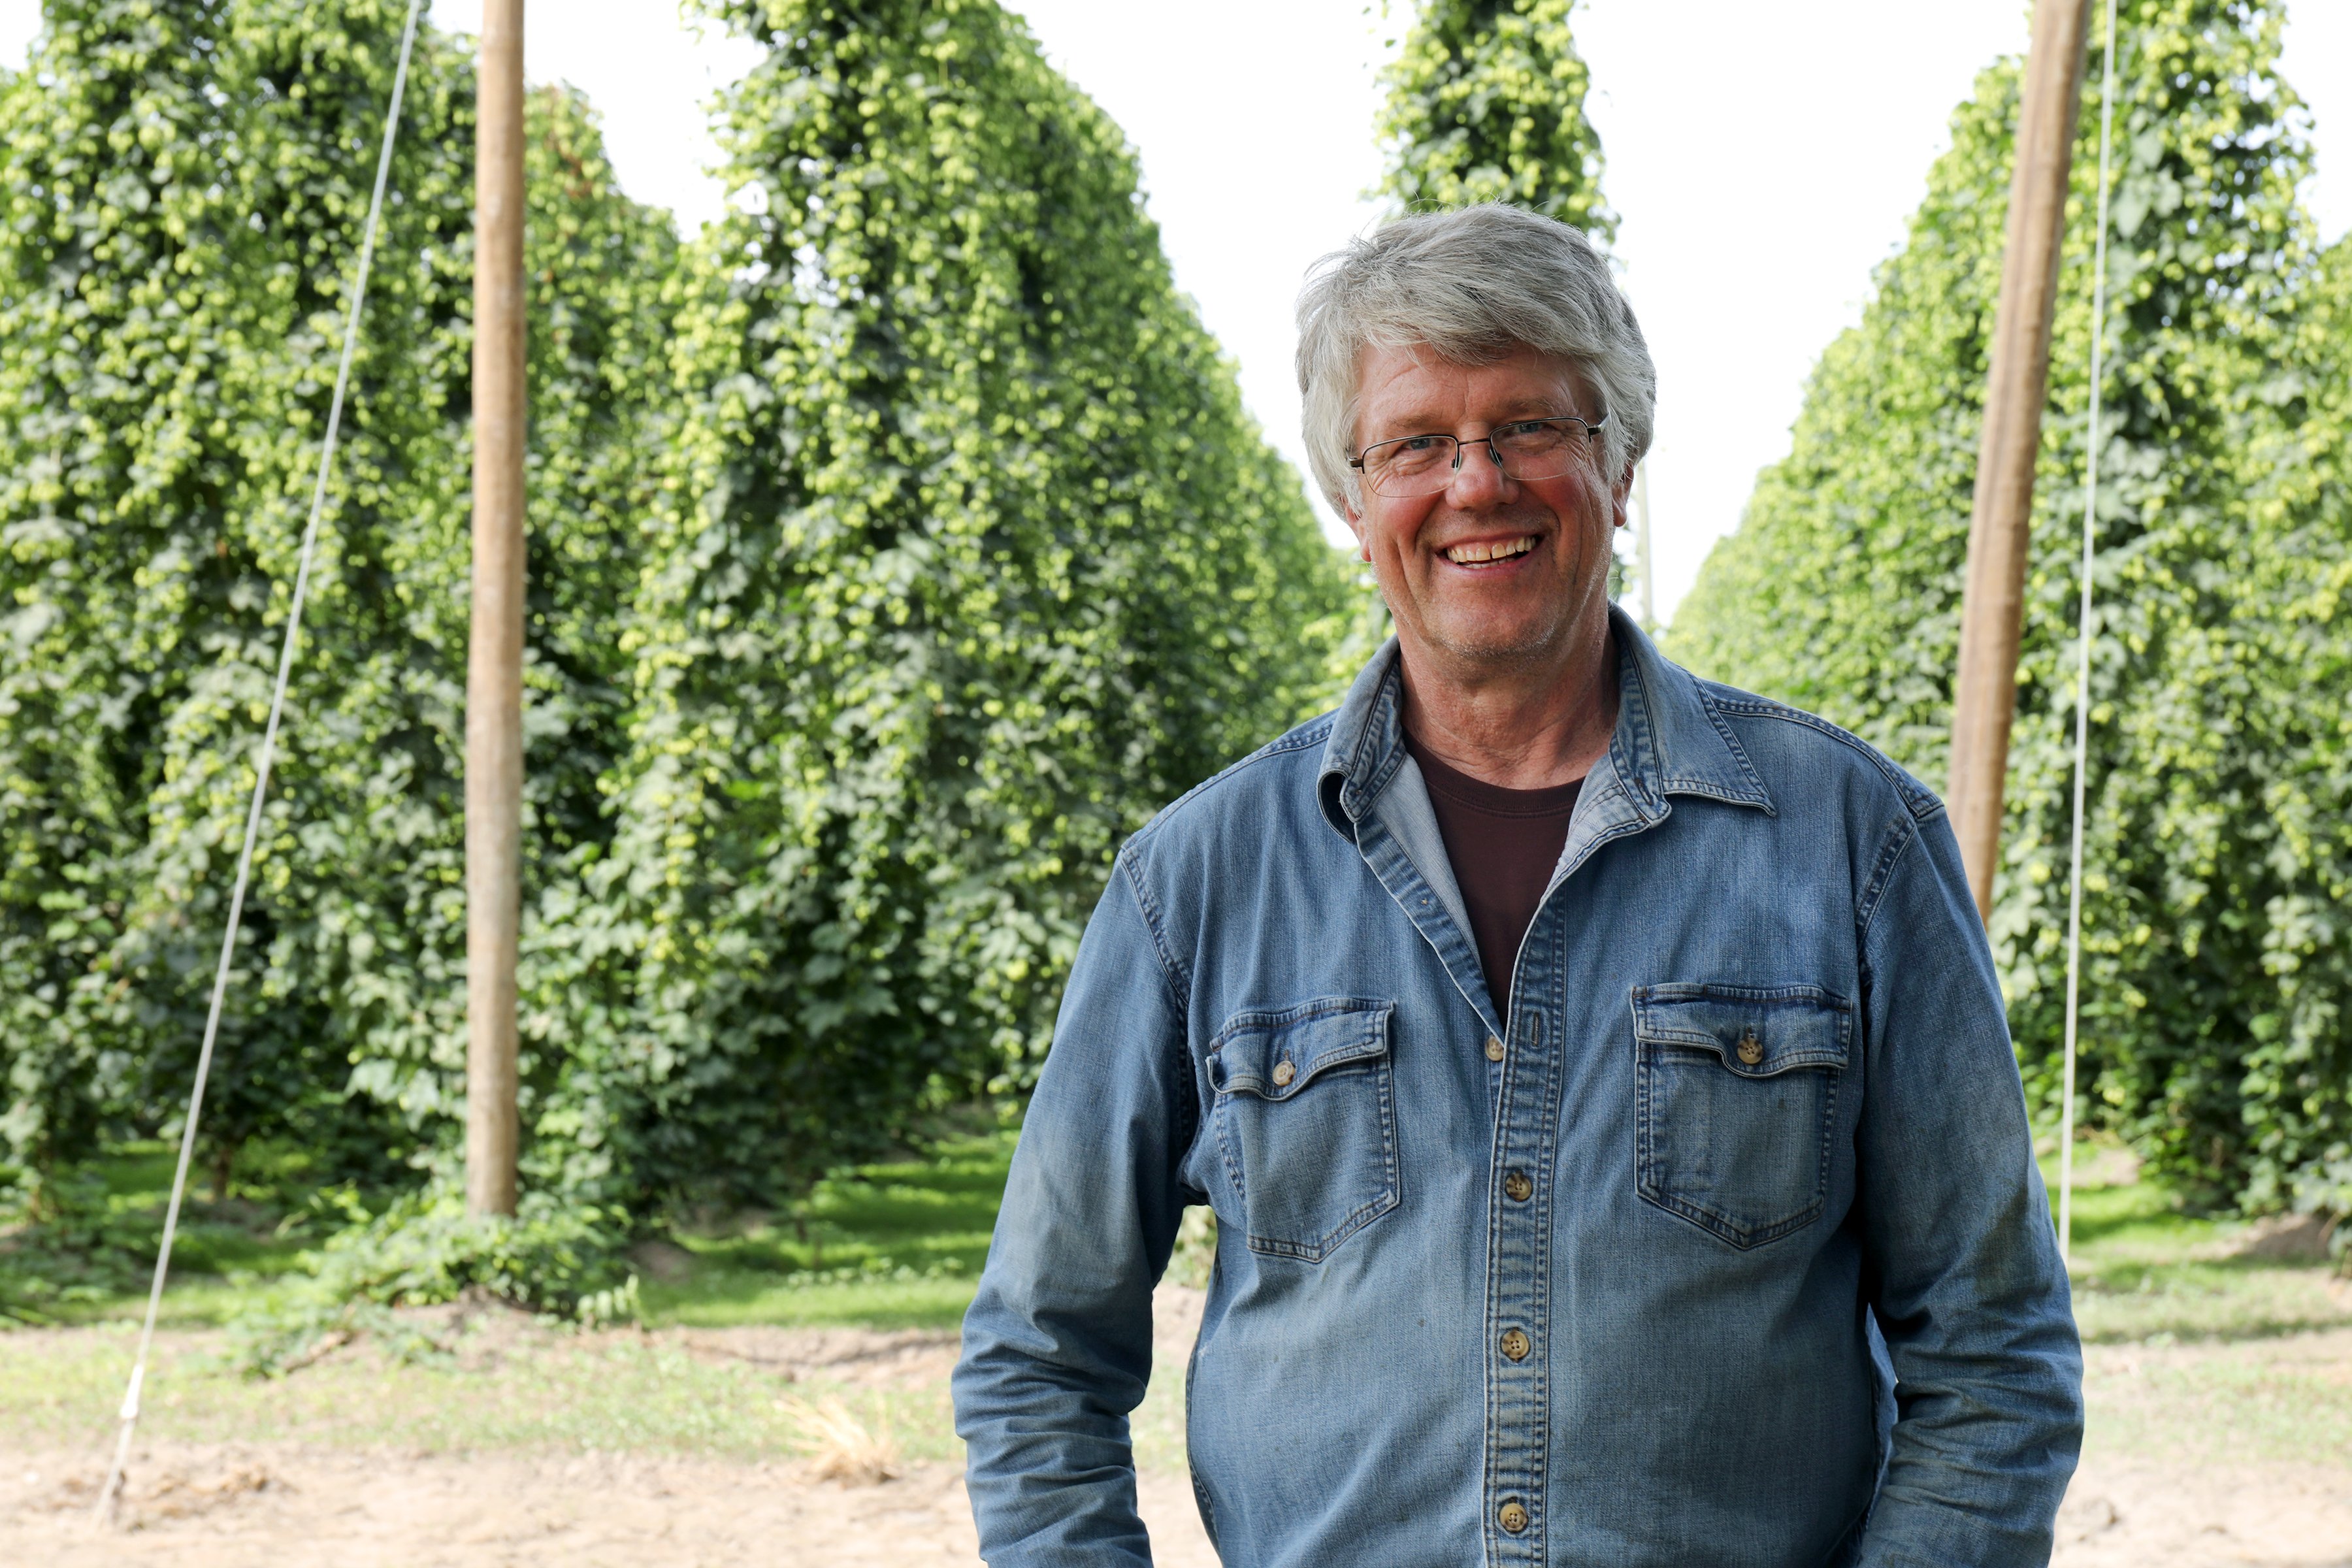 Older male farmer in denim shirt stands smiling in front of rows of hop vines ready to be harvested.